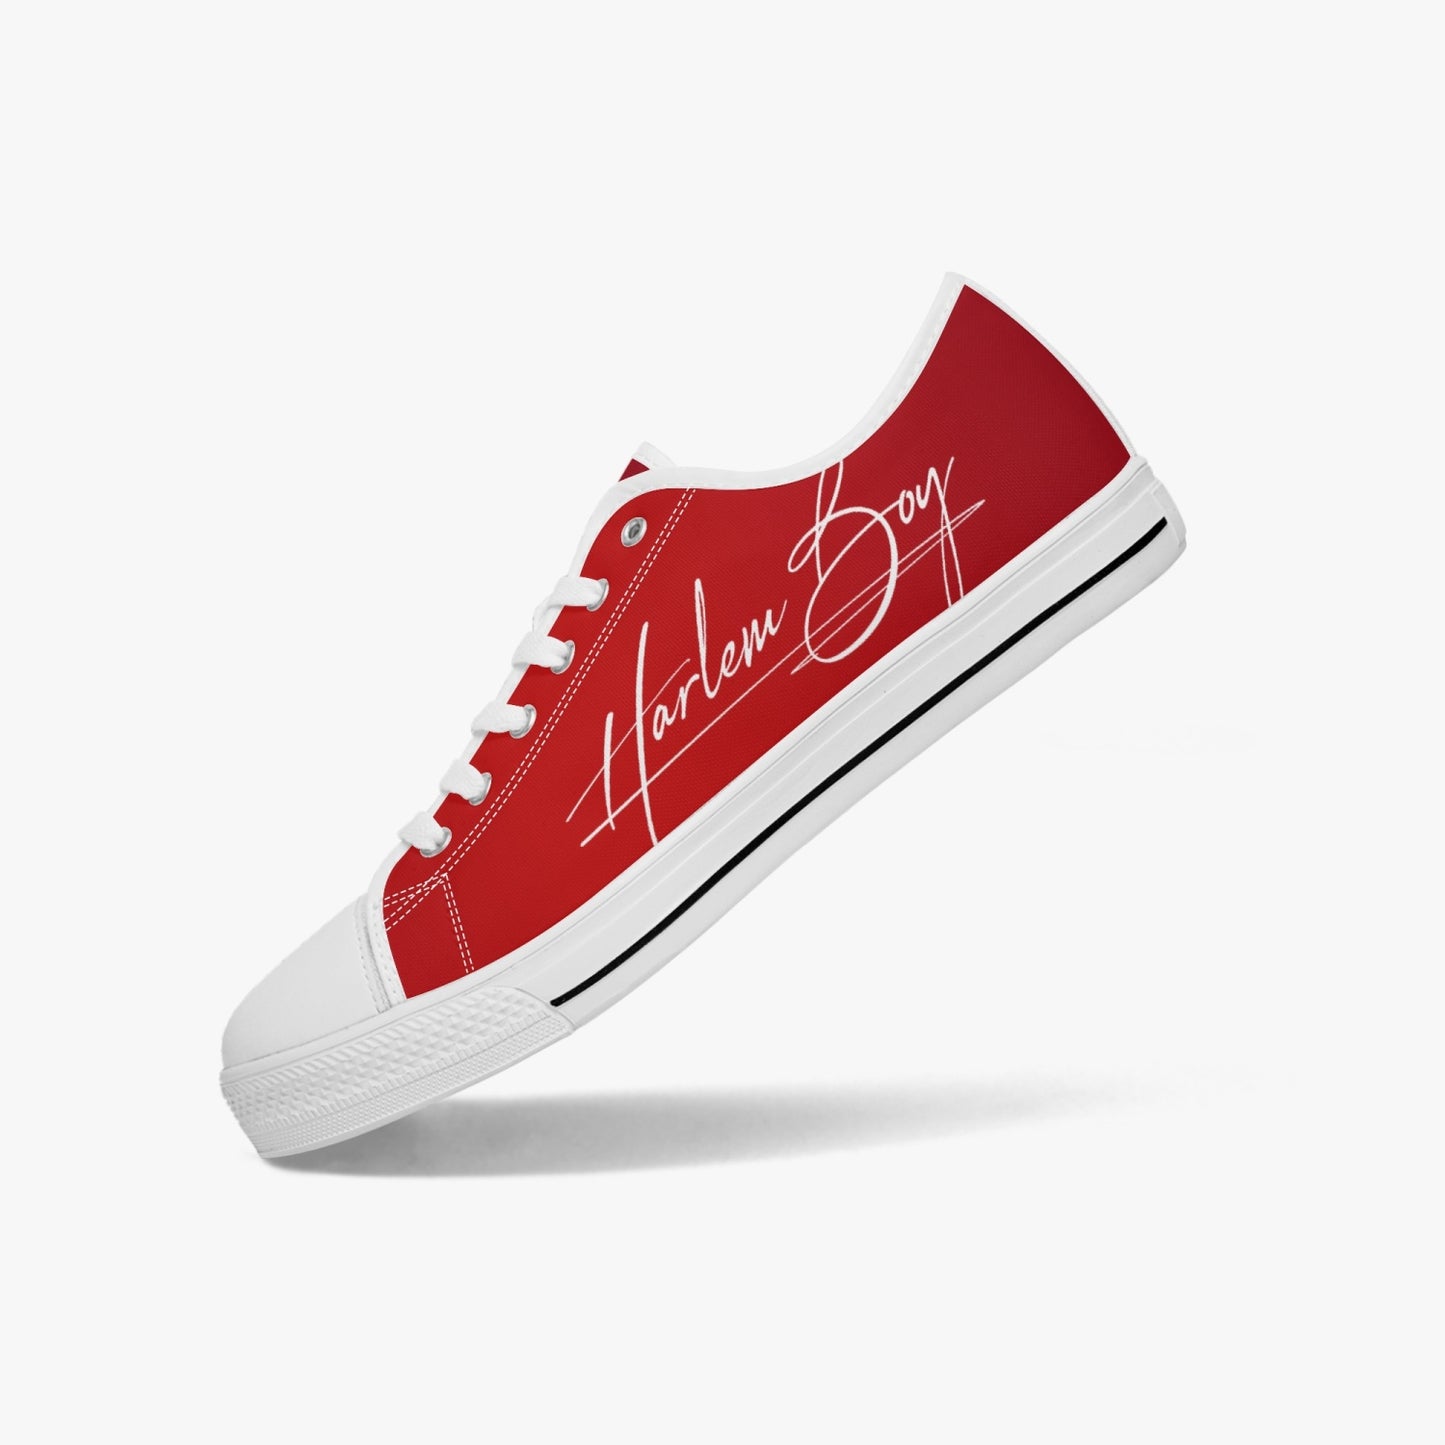 HB Harlem Boy "Lenox Ave" Classic Low Tops - Ruby - Men (Black or White Sole)